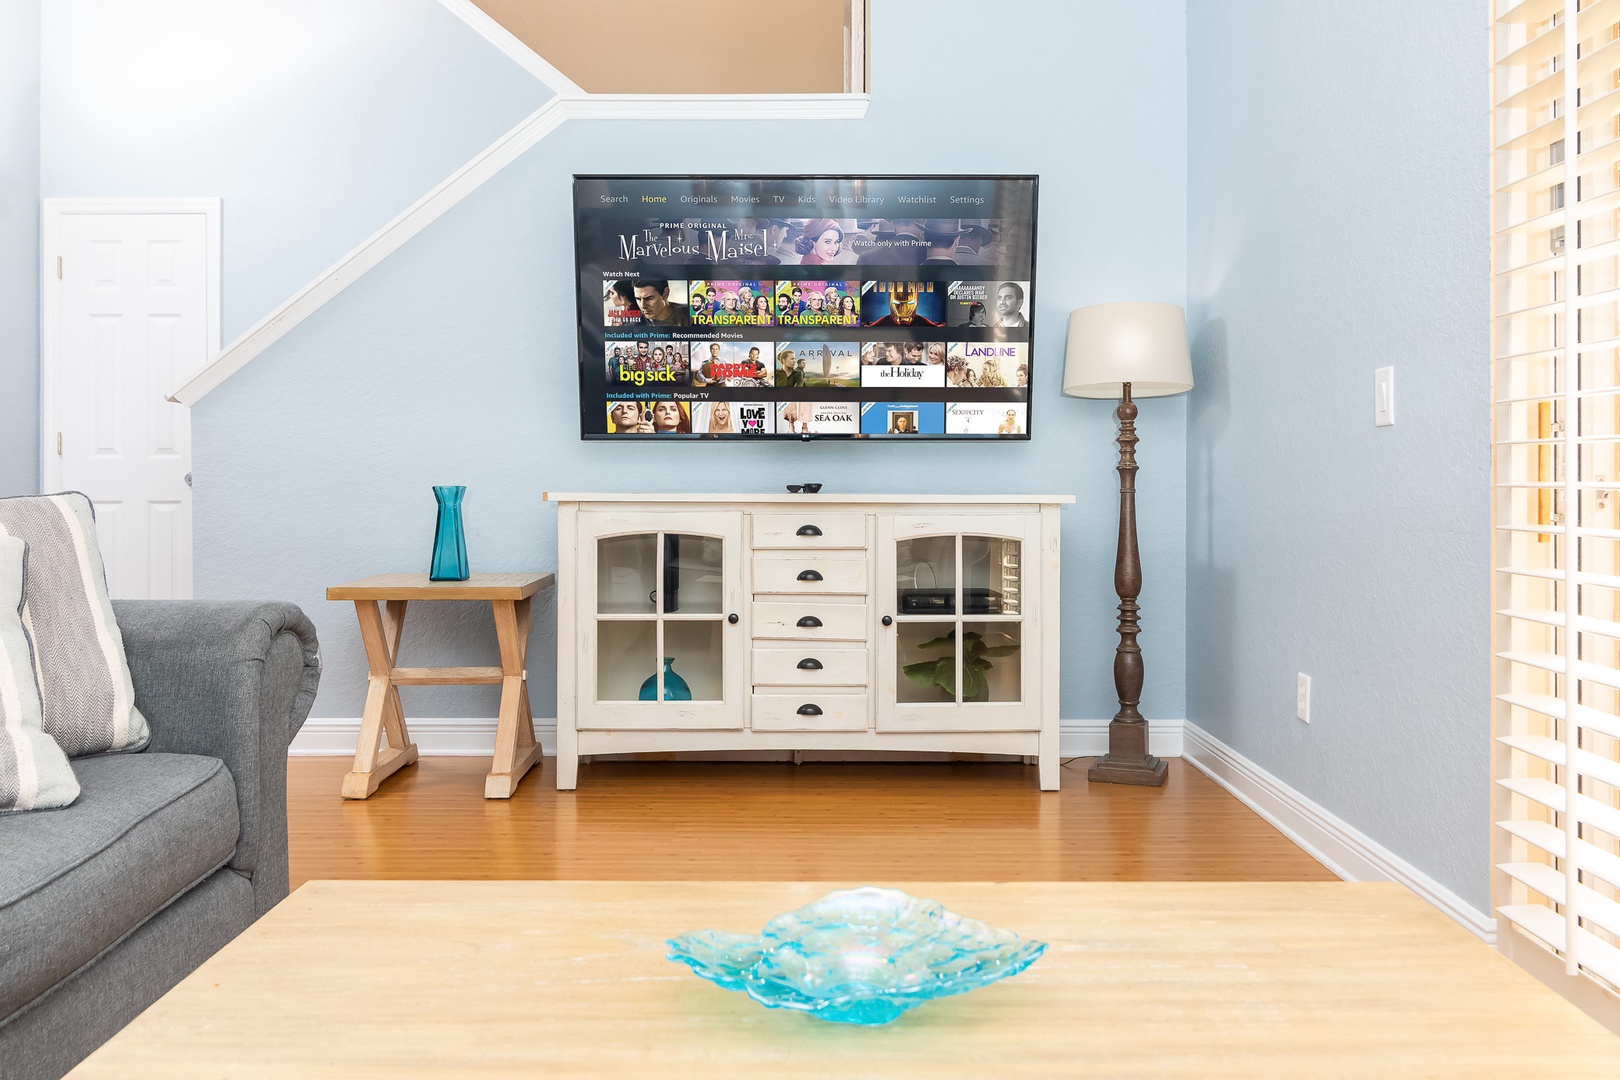 SmartTV featured in the living room